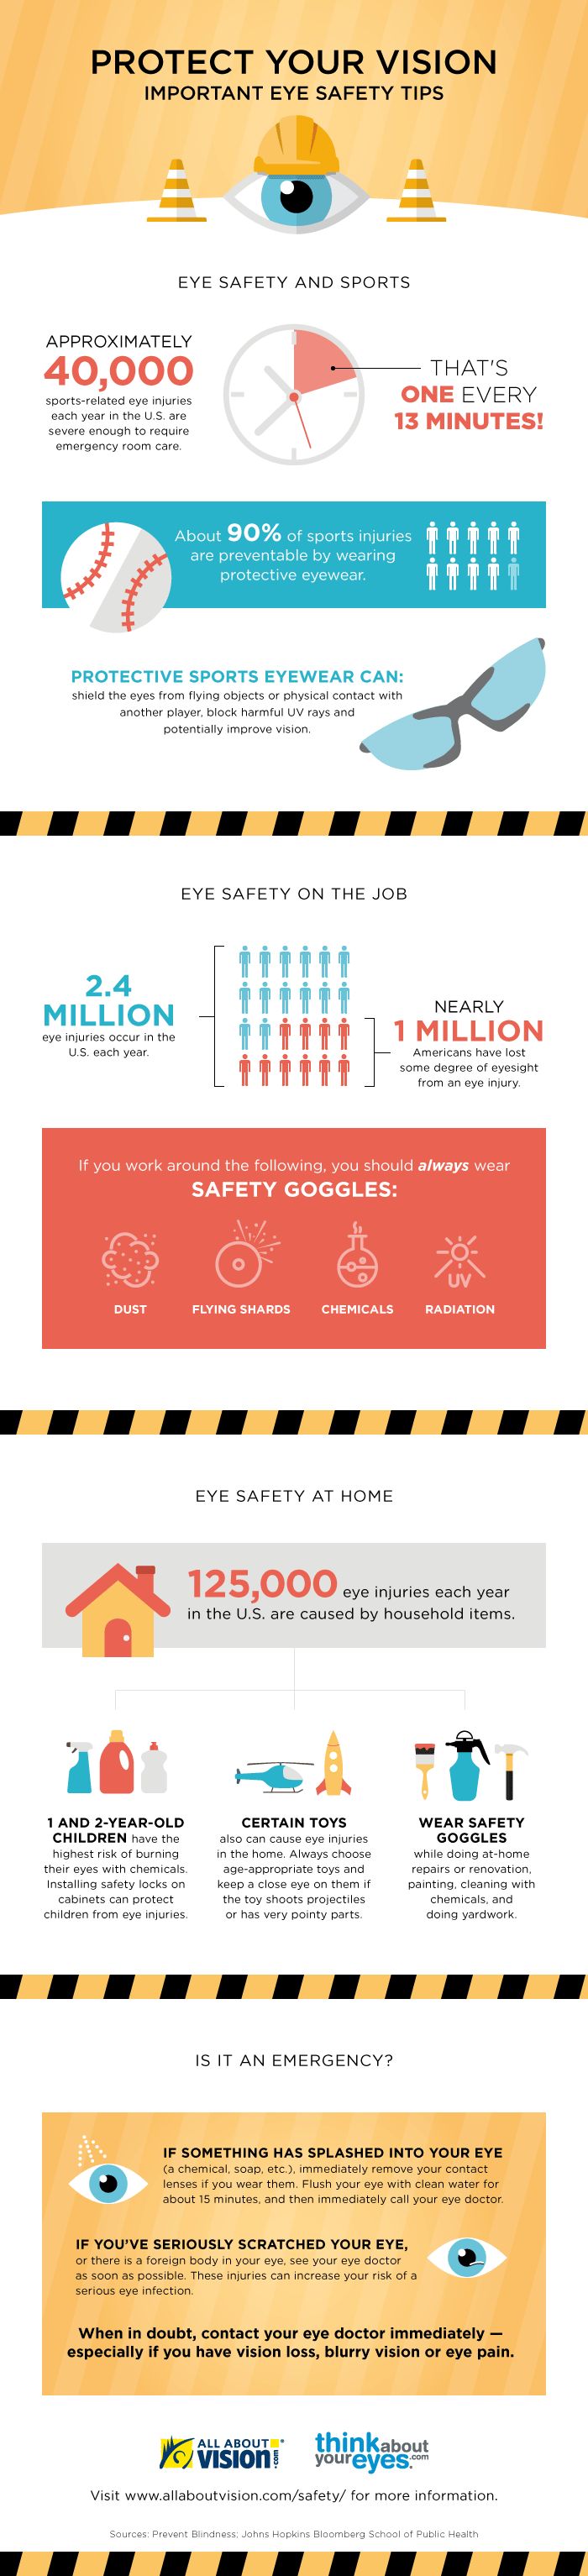 https://cdn.allaboutvision.com/eye-safety-infographic-700x3067.png